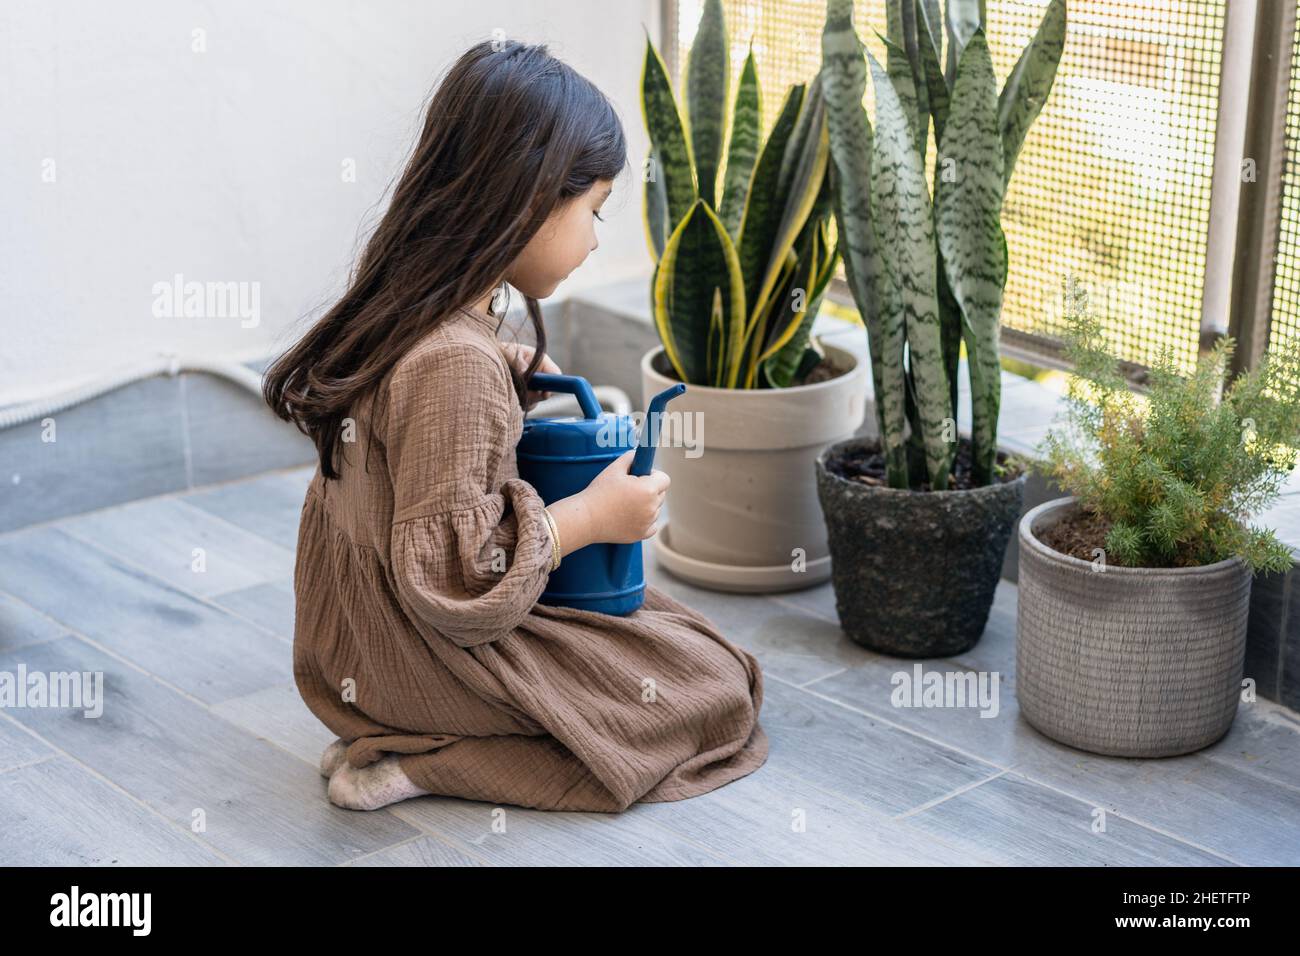 Little girl is watering flowers on the balcony at home. Active preschool child watering plants with water can. Stock Photo